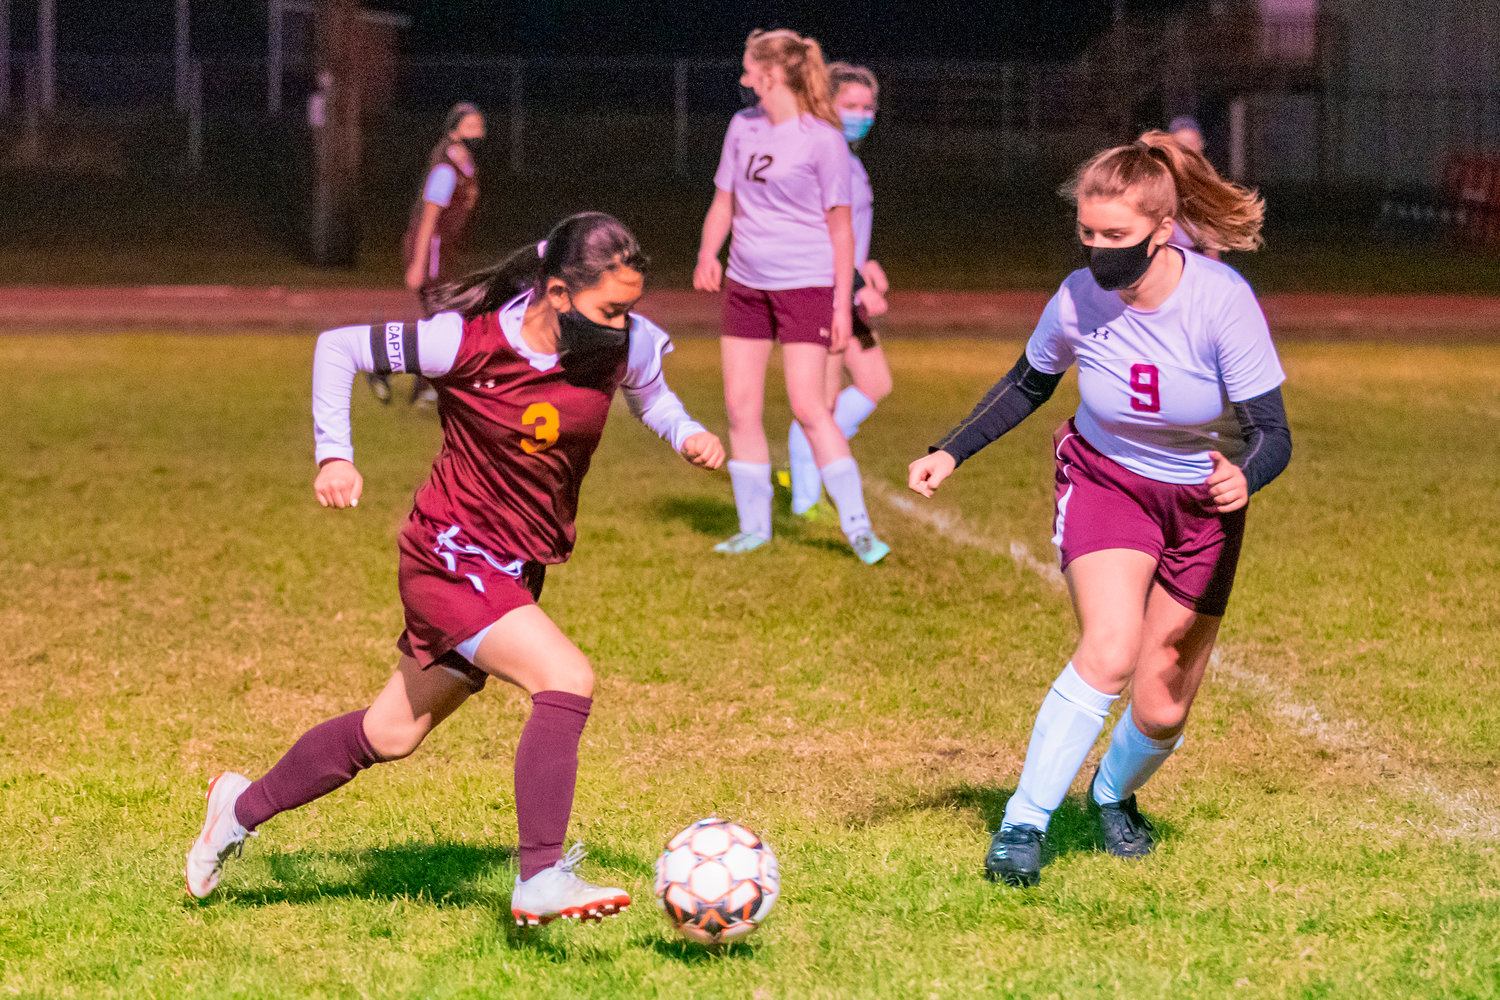 Cardinals’ Gabriela Cruz (3) takes the ball down field during a game Wednesday night in Winlock.